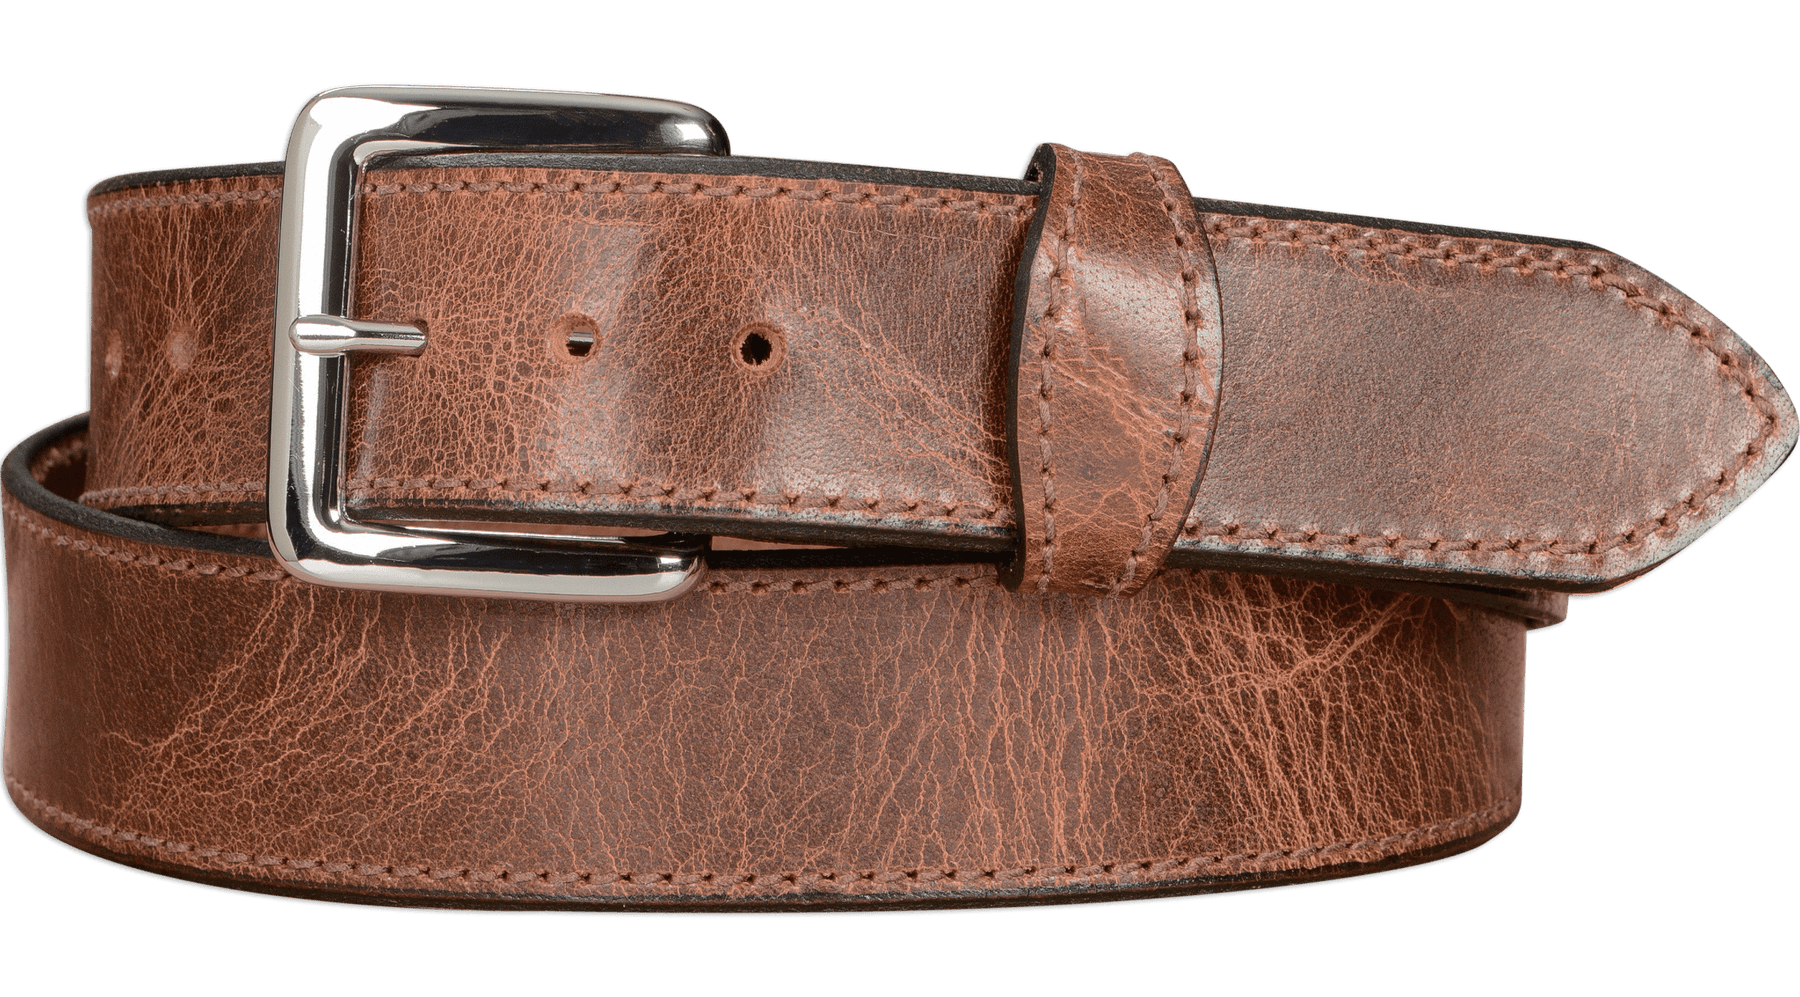 Bullhide Belts Mens Leather Belt for Work, Casual, Dress 1.50 Wide, Brown,  32 at  Men's Clothing store